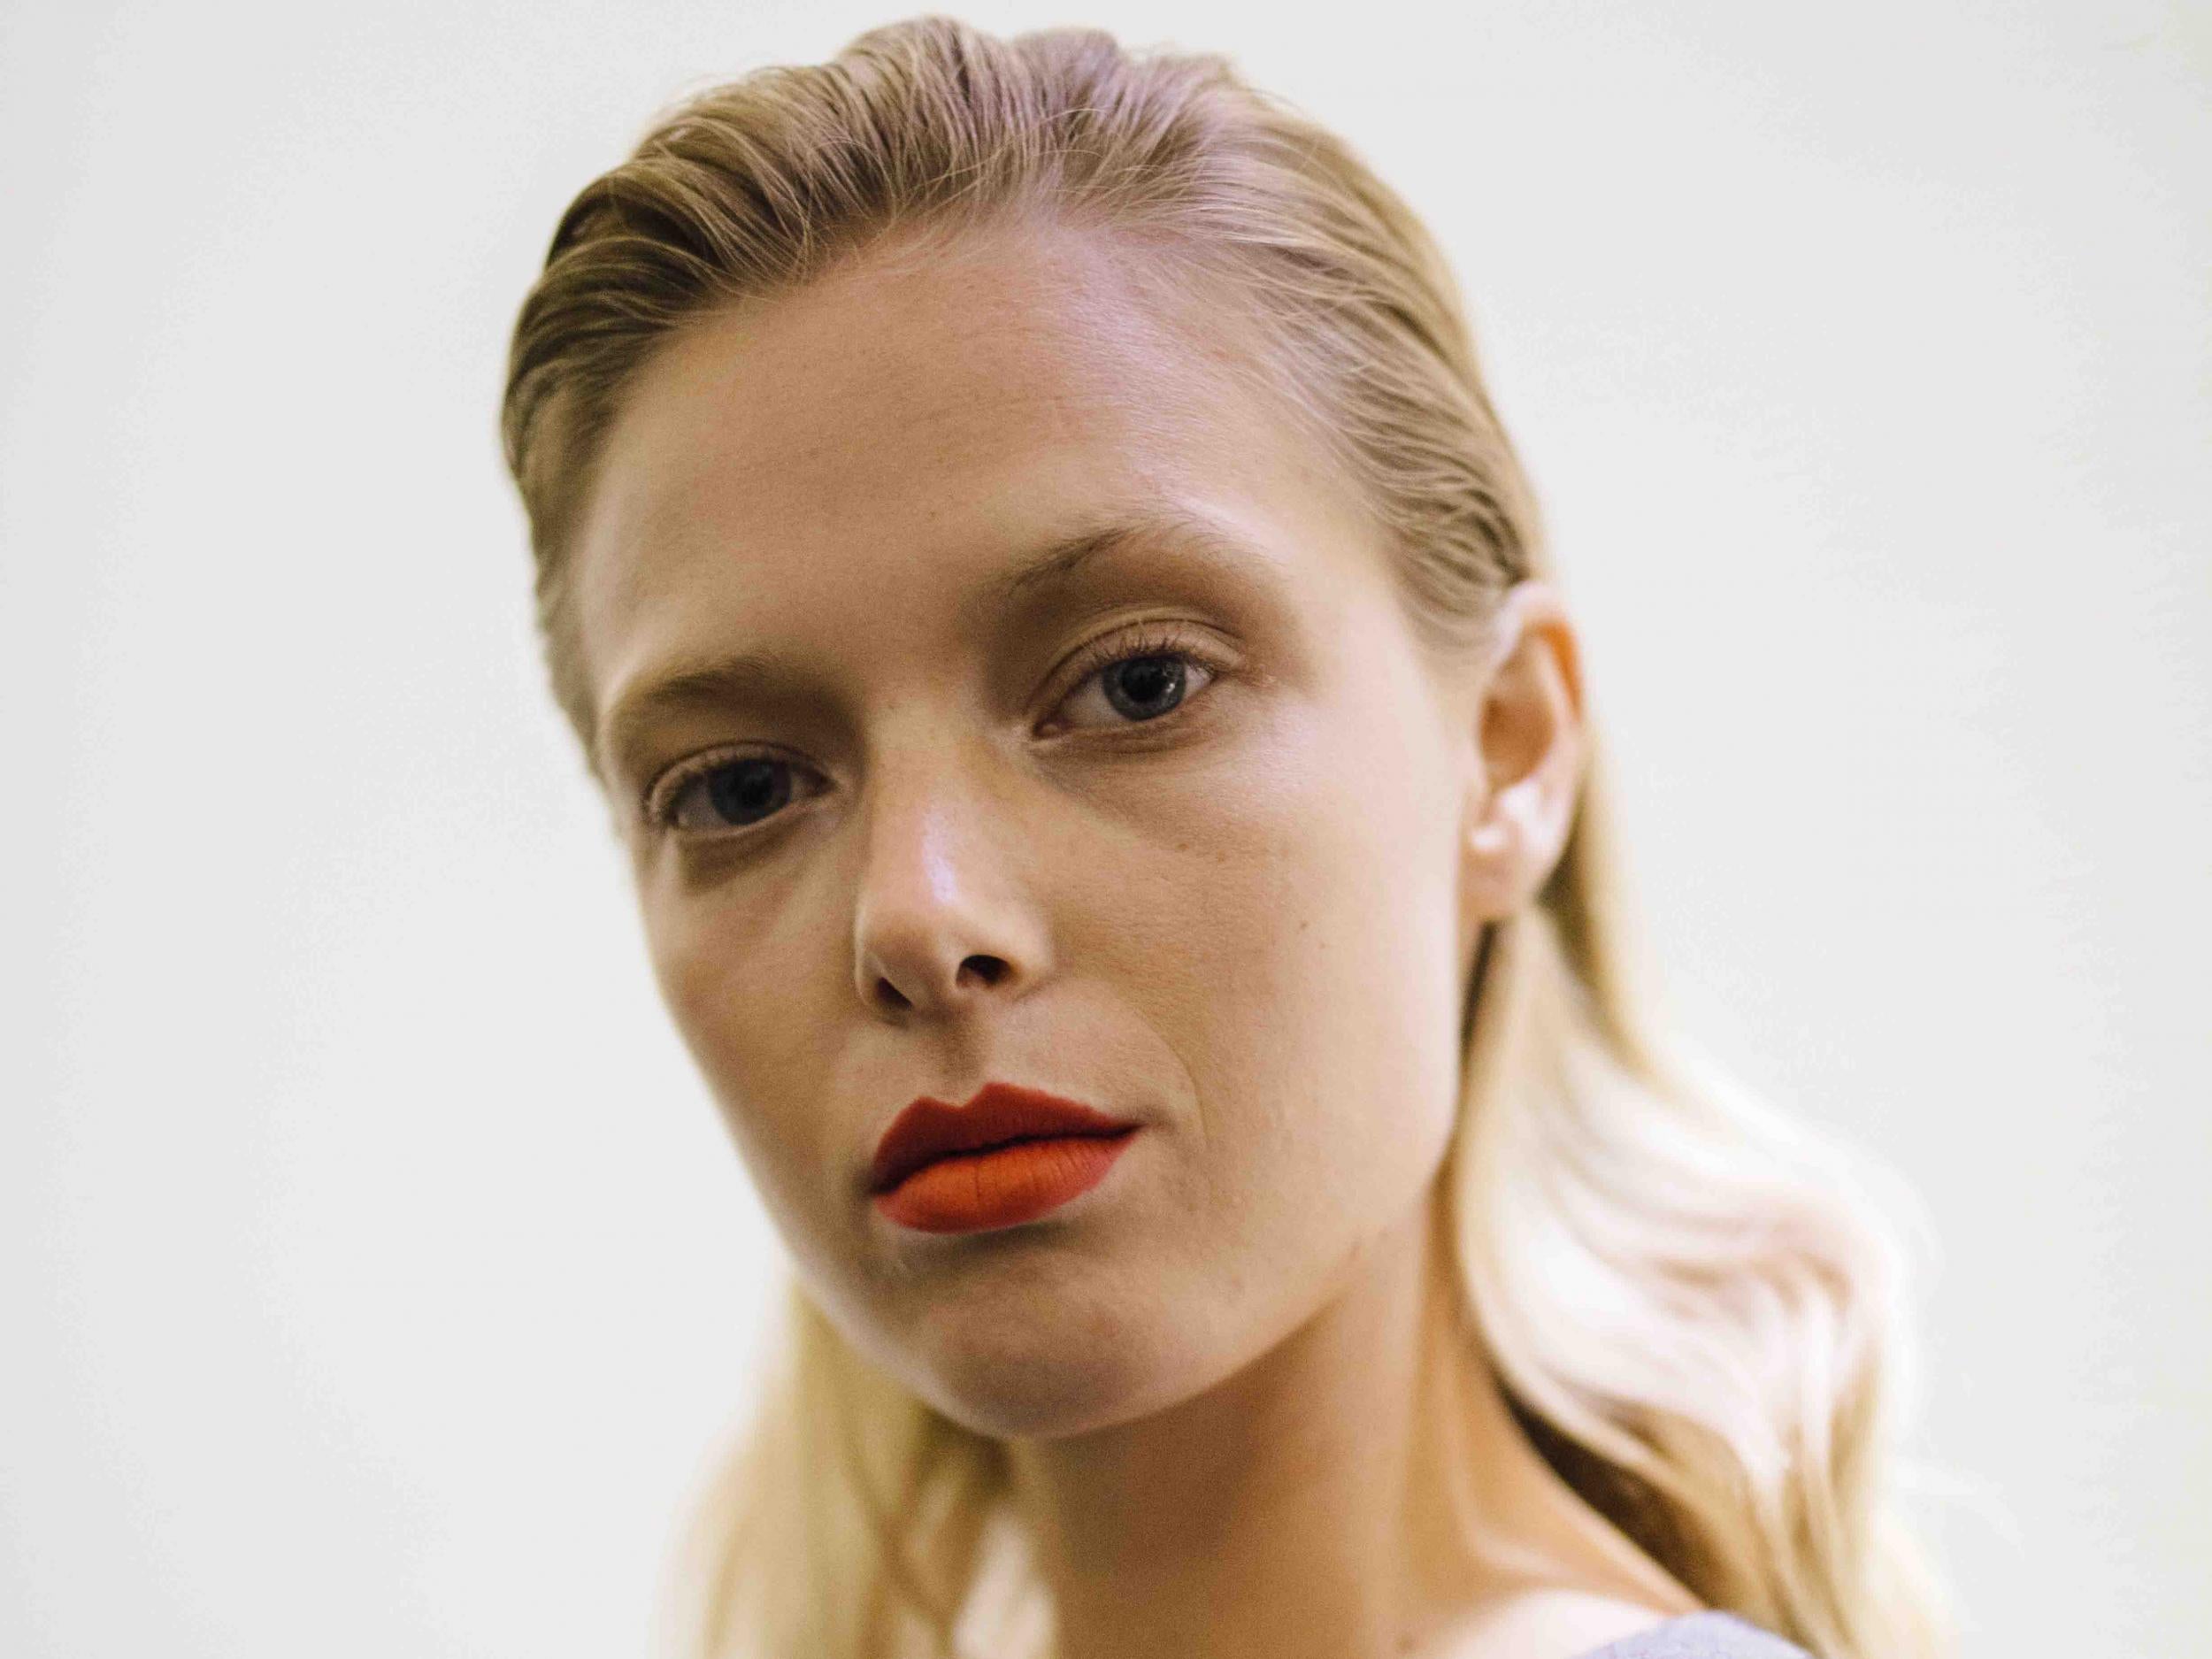 At Jason Wu, makeup artist Yadim paired a fresh, bare face with a bright orange-red lips